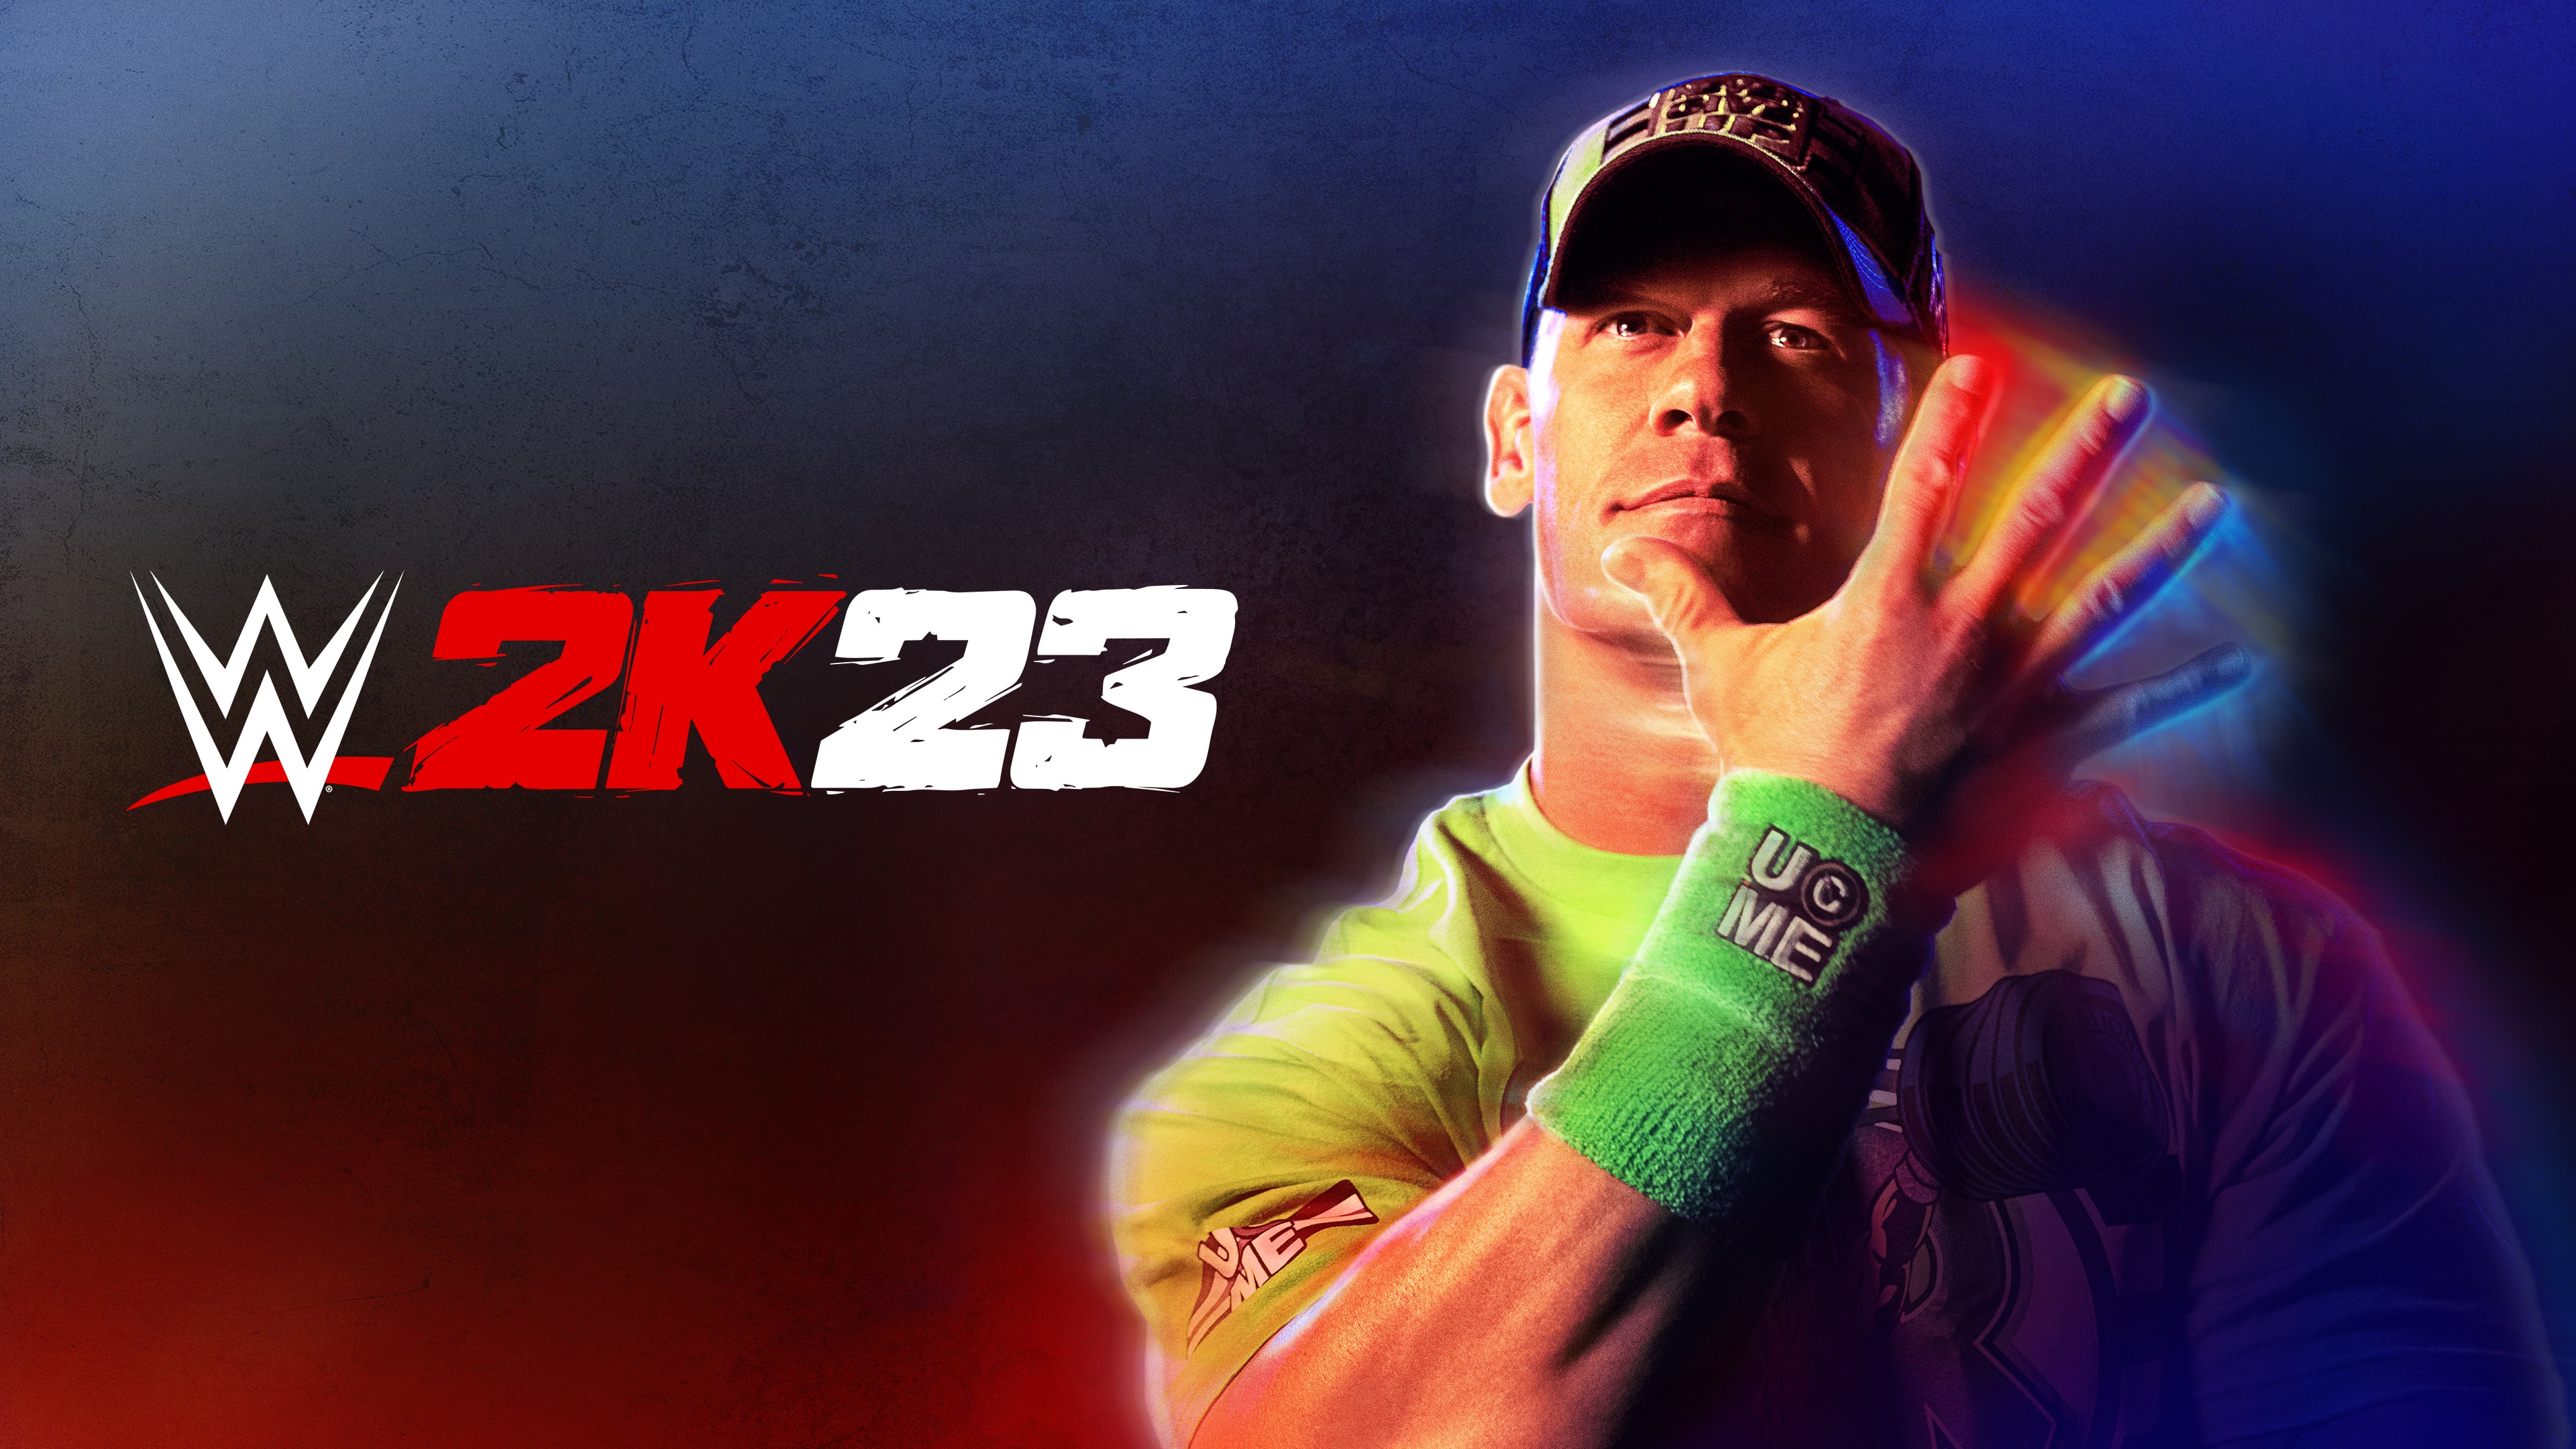 Official WWE 2K23 gameplay trailer revealed